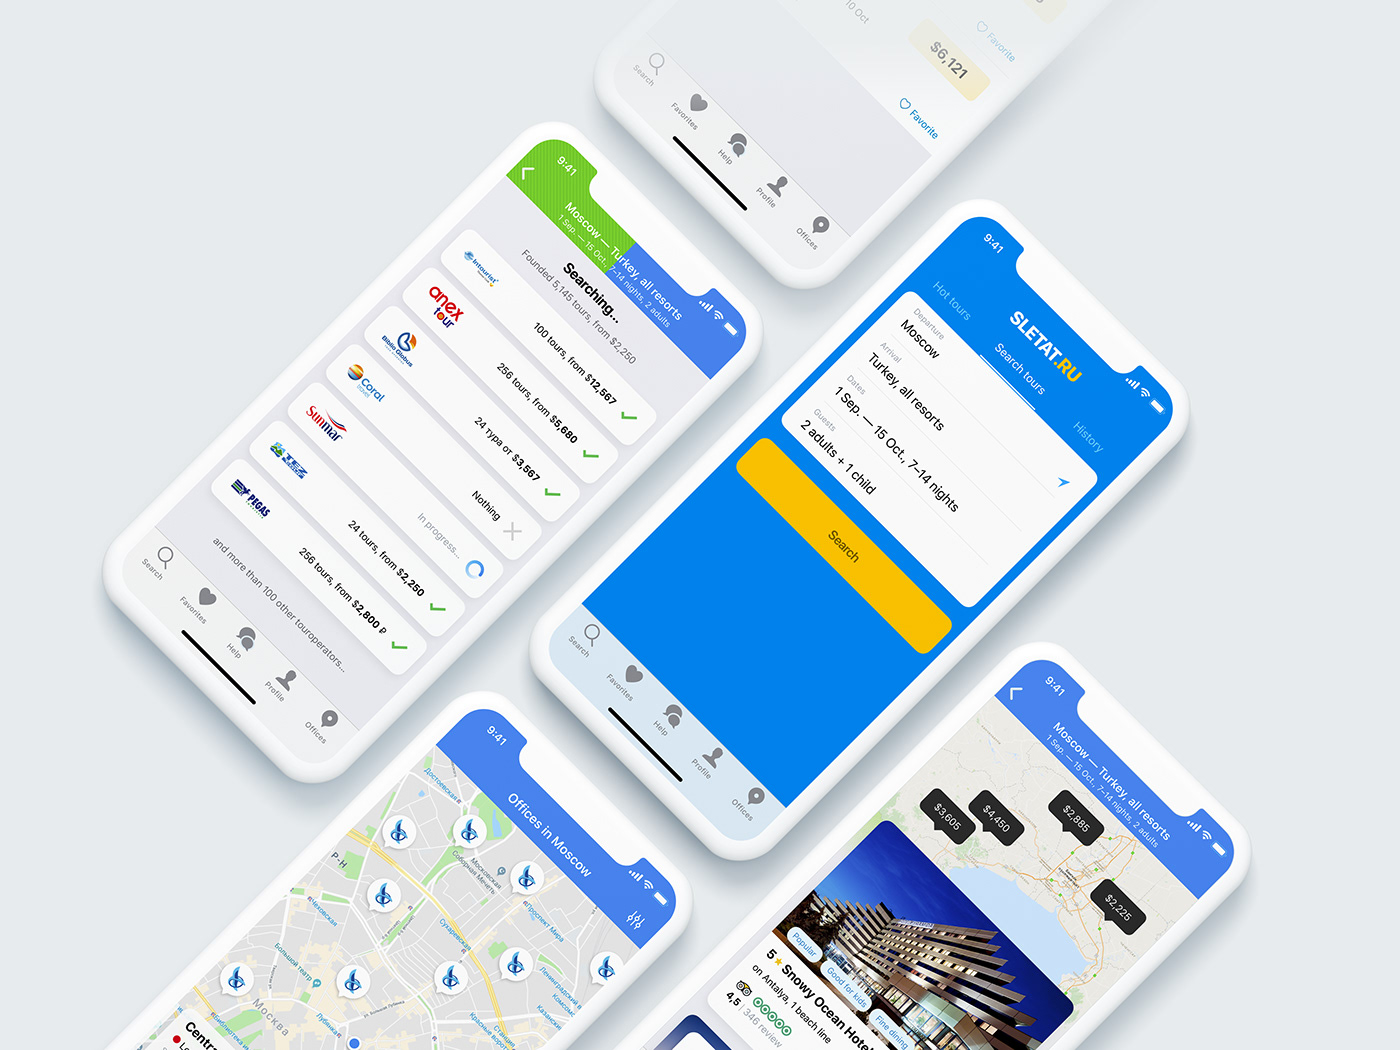 UI ux design colors app prototype Usability concept ios android Web iphone Mockup